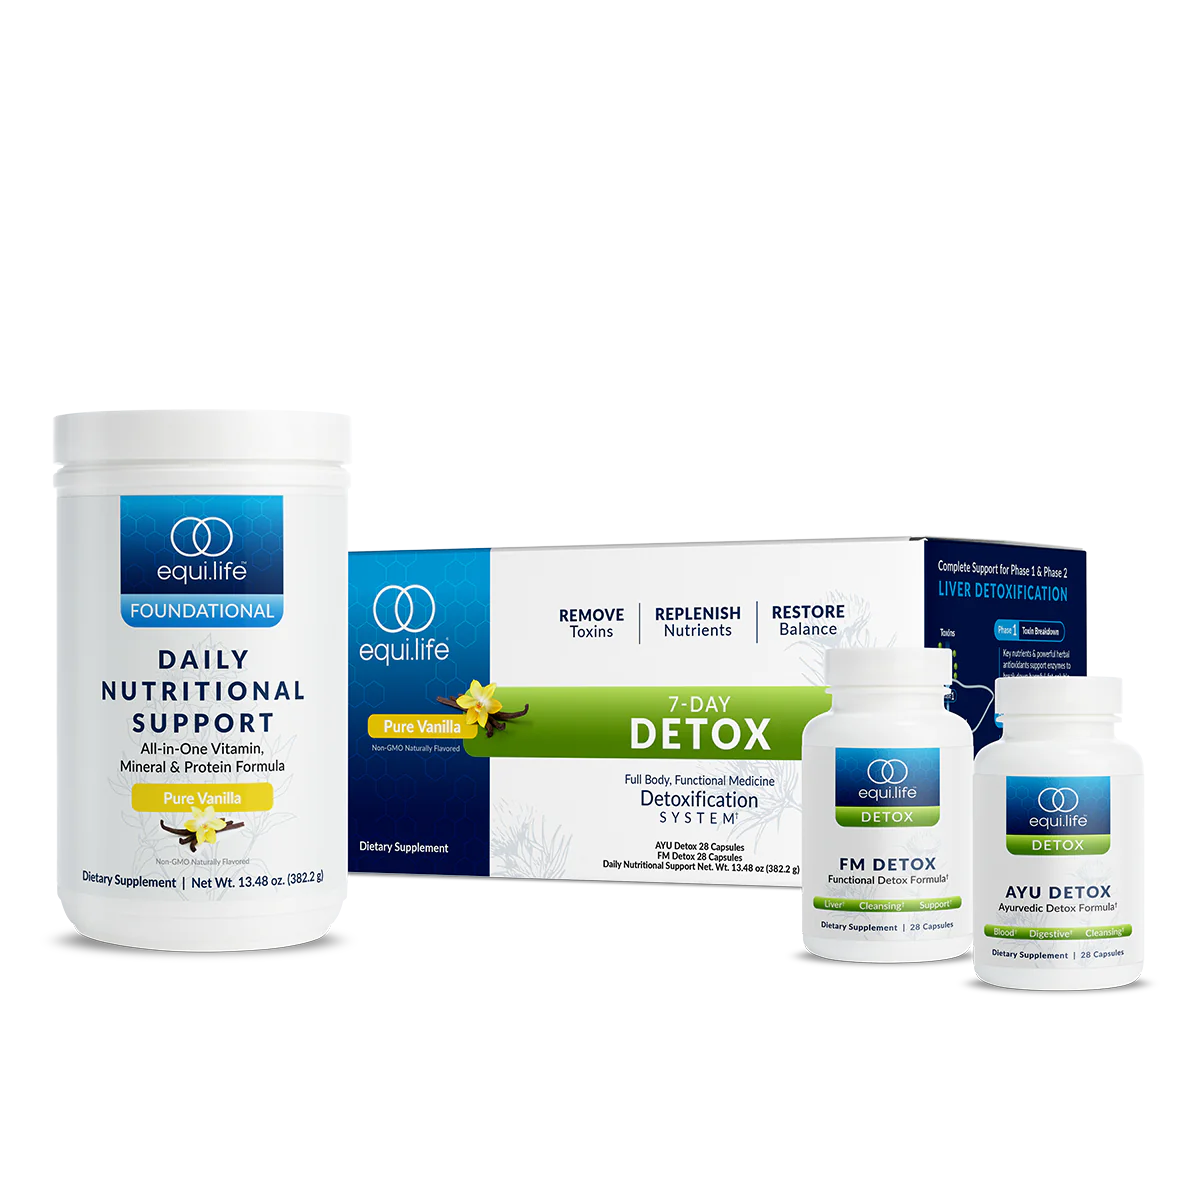 21-Day Reset Kit by Equ.life